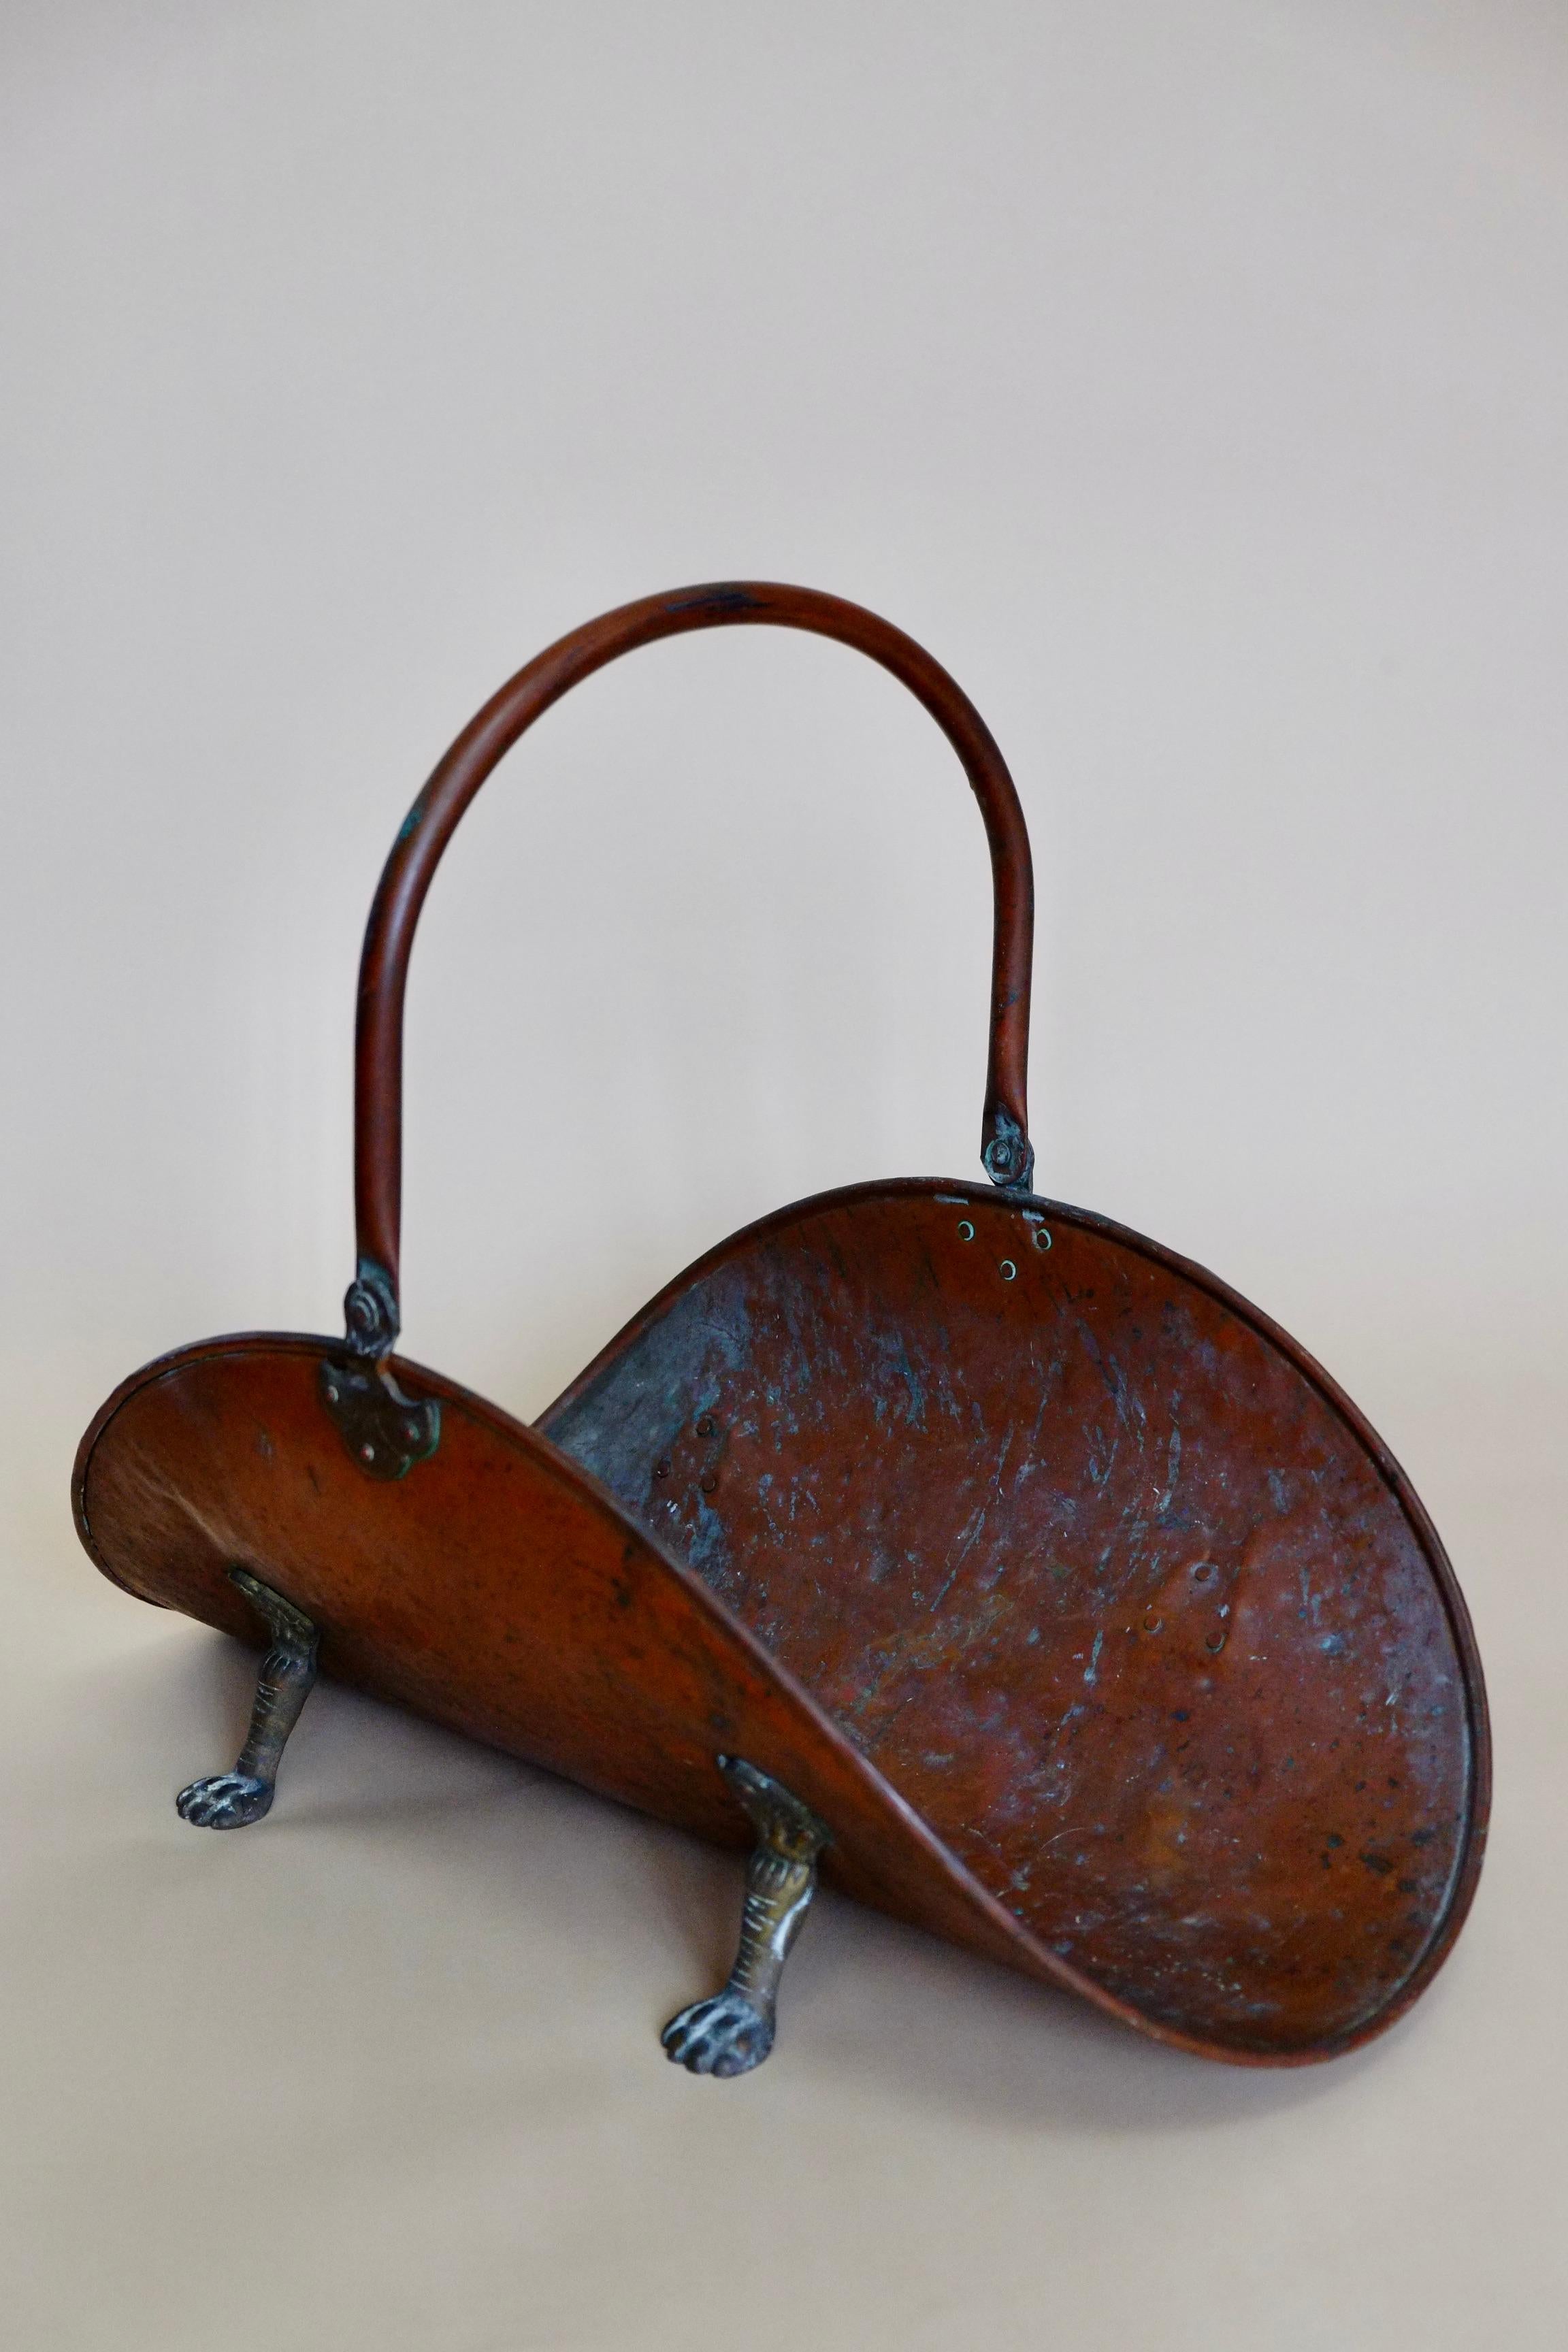 Extra large copper log holder. England circa 1920's. The most beautiful antique piece made in hammered copper sheet with brass details. The log holder has a beautiful curved oval shape and stands on small brass paw feet. There is a long foldable